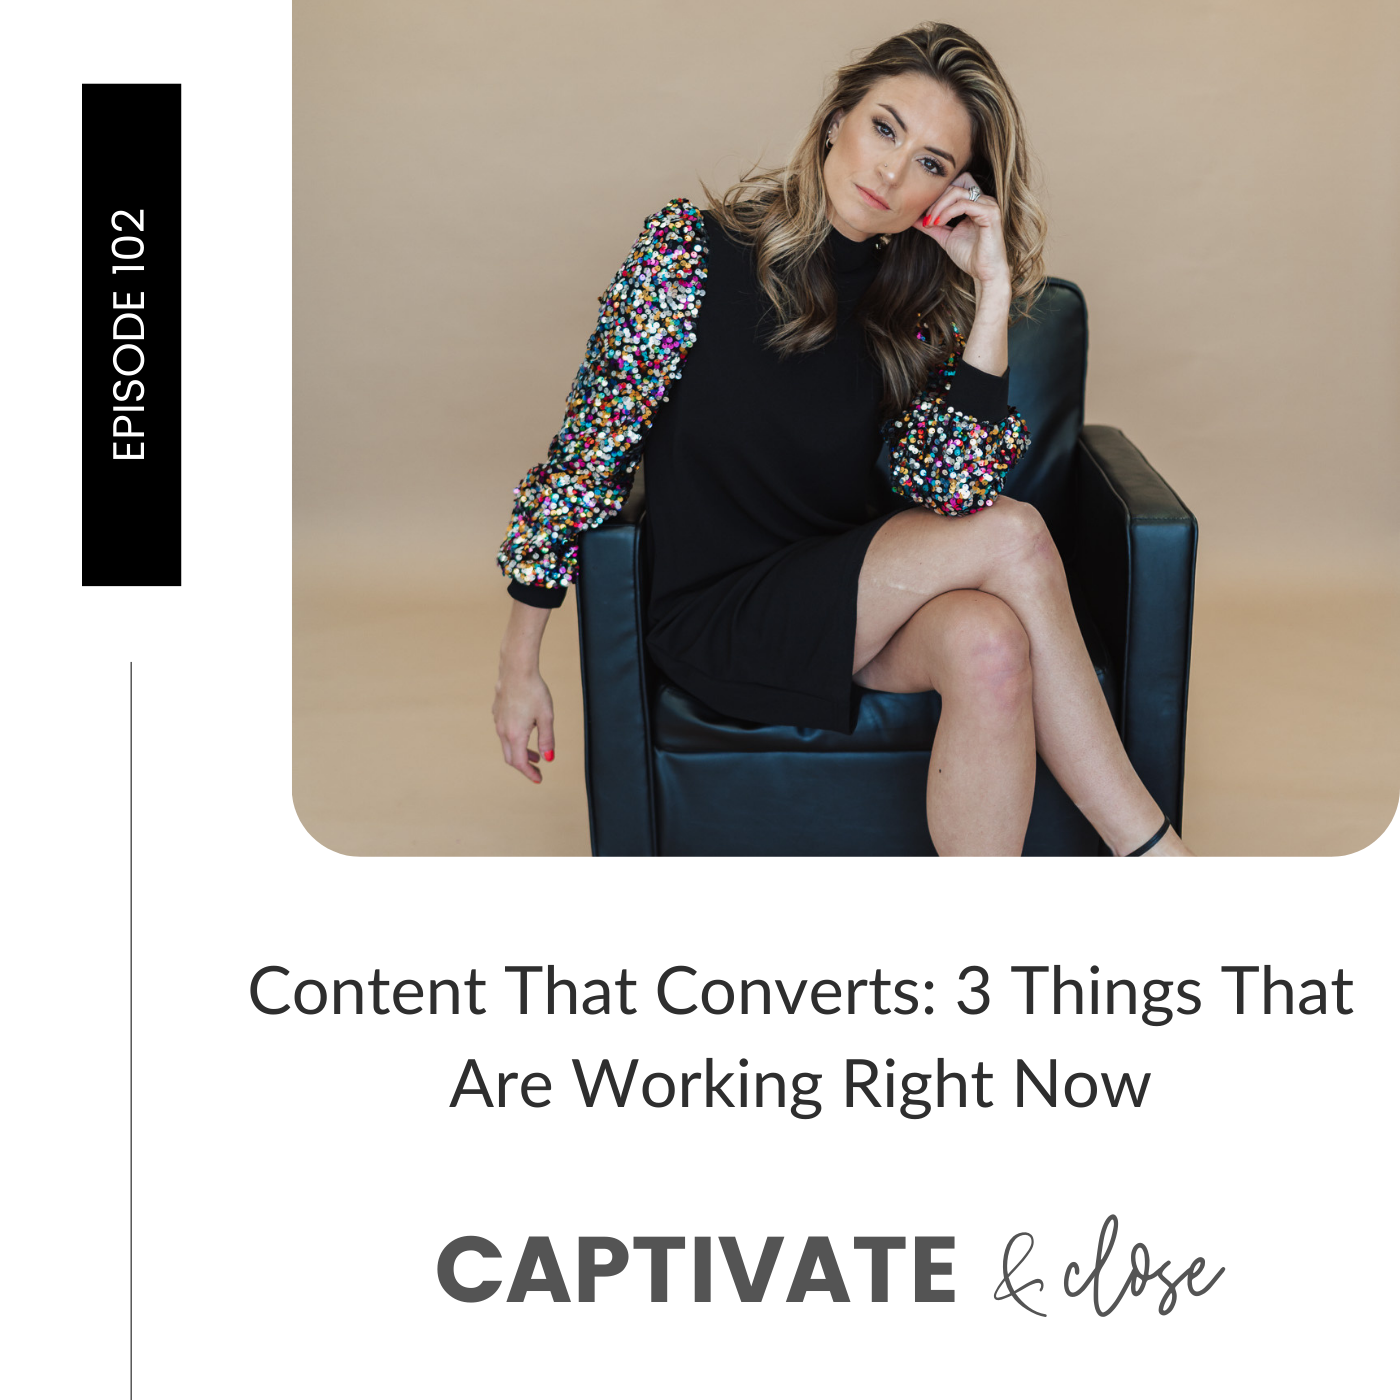 Content That Converts: 3 Things That Are Working Right Now